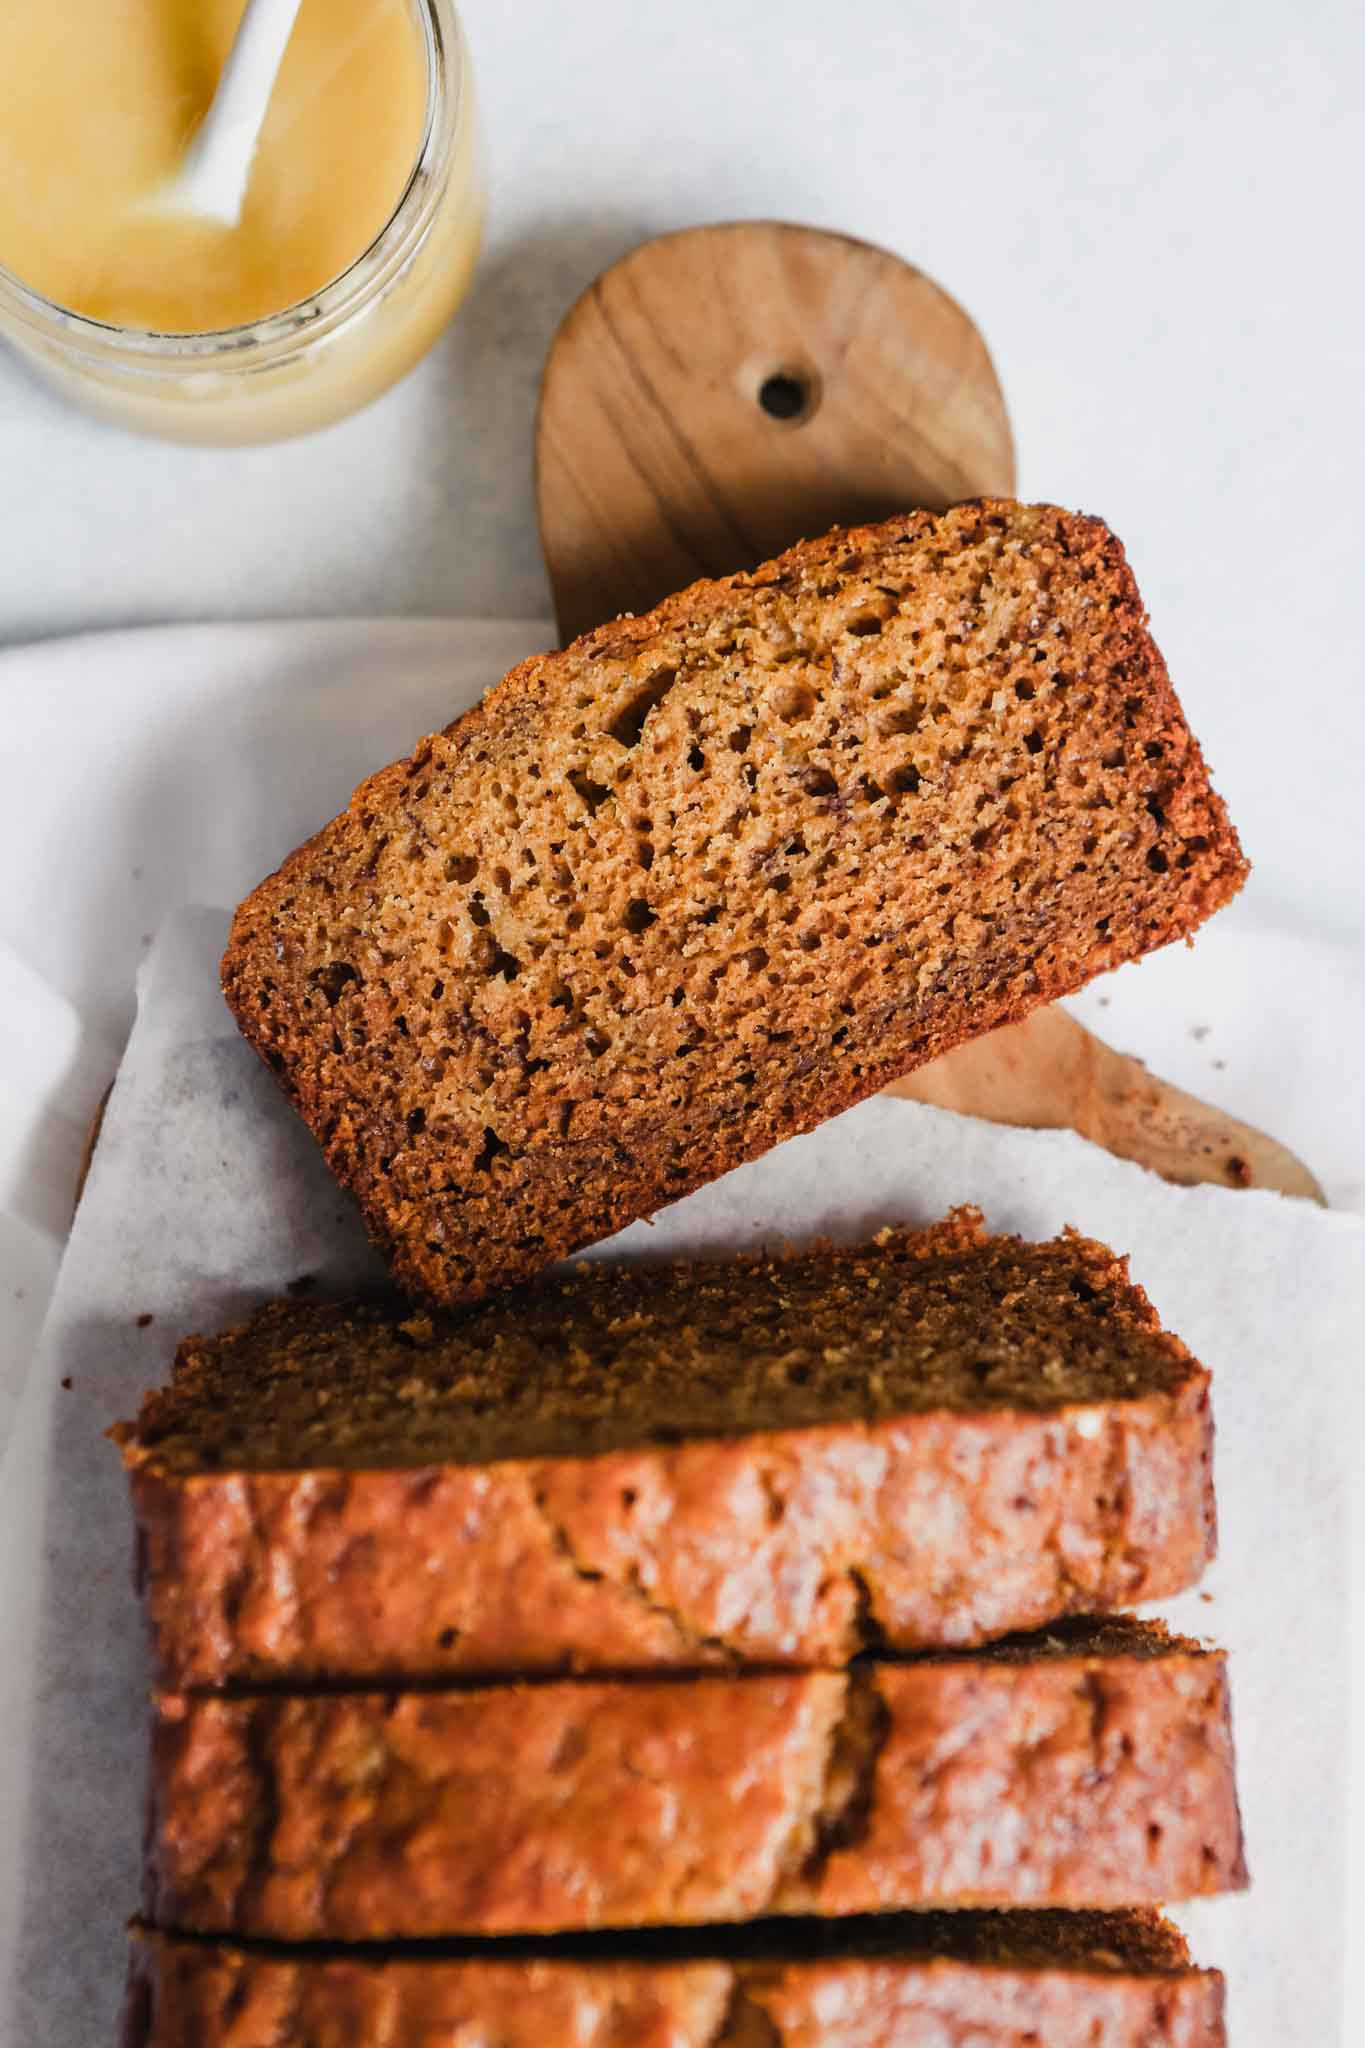 Banana Bread with Oil Elegant Olive Oil Banana Bread with whole Wheat Flour